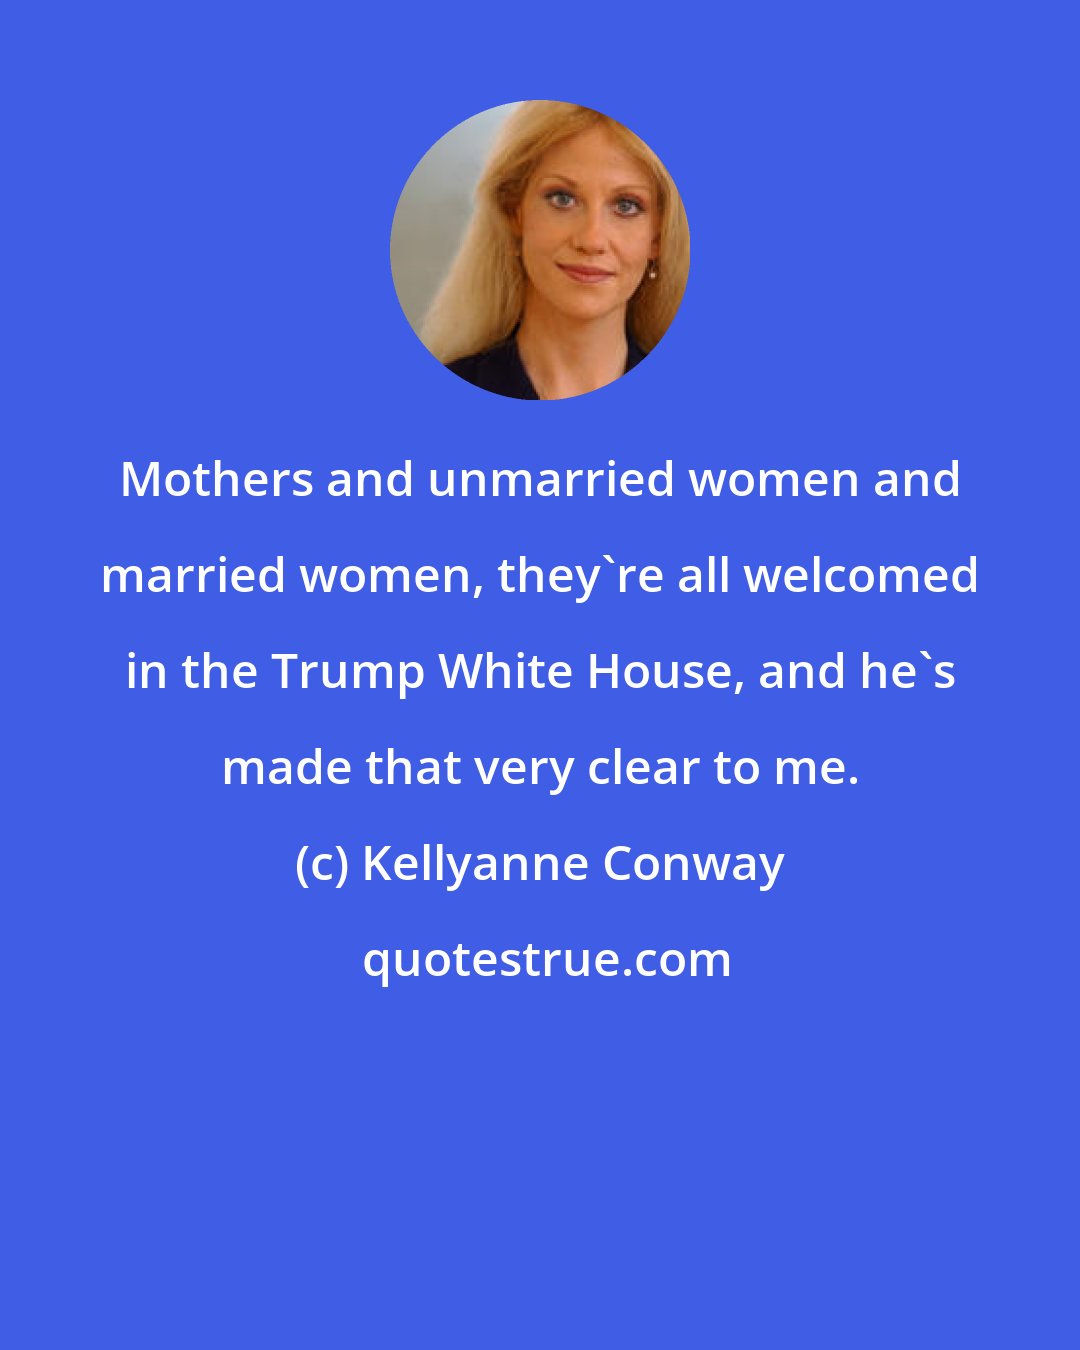 Kellyanne Conway: Mothers and unmarried women and married women, they're all welcomed in the Trump White House, and he's made that very clear to me.